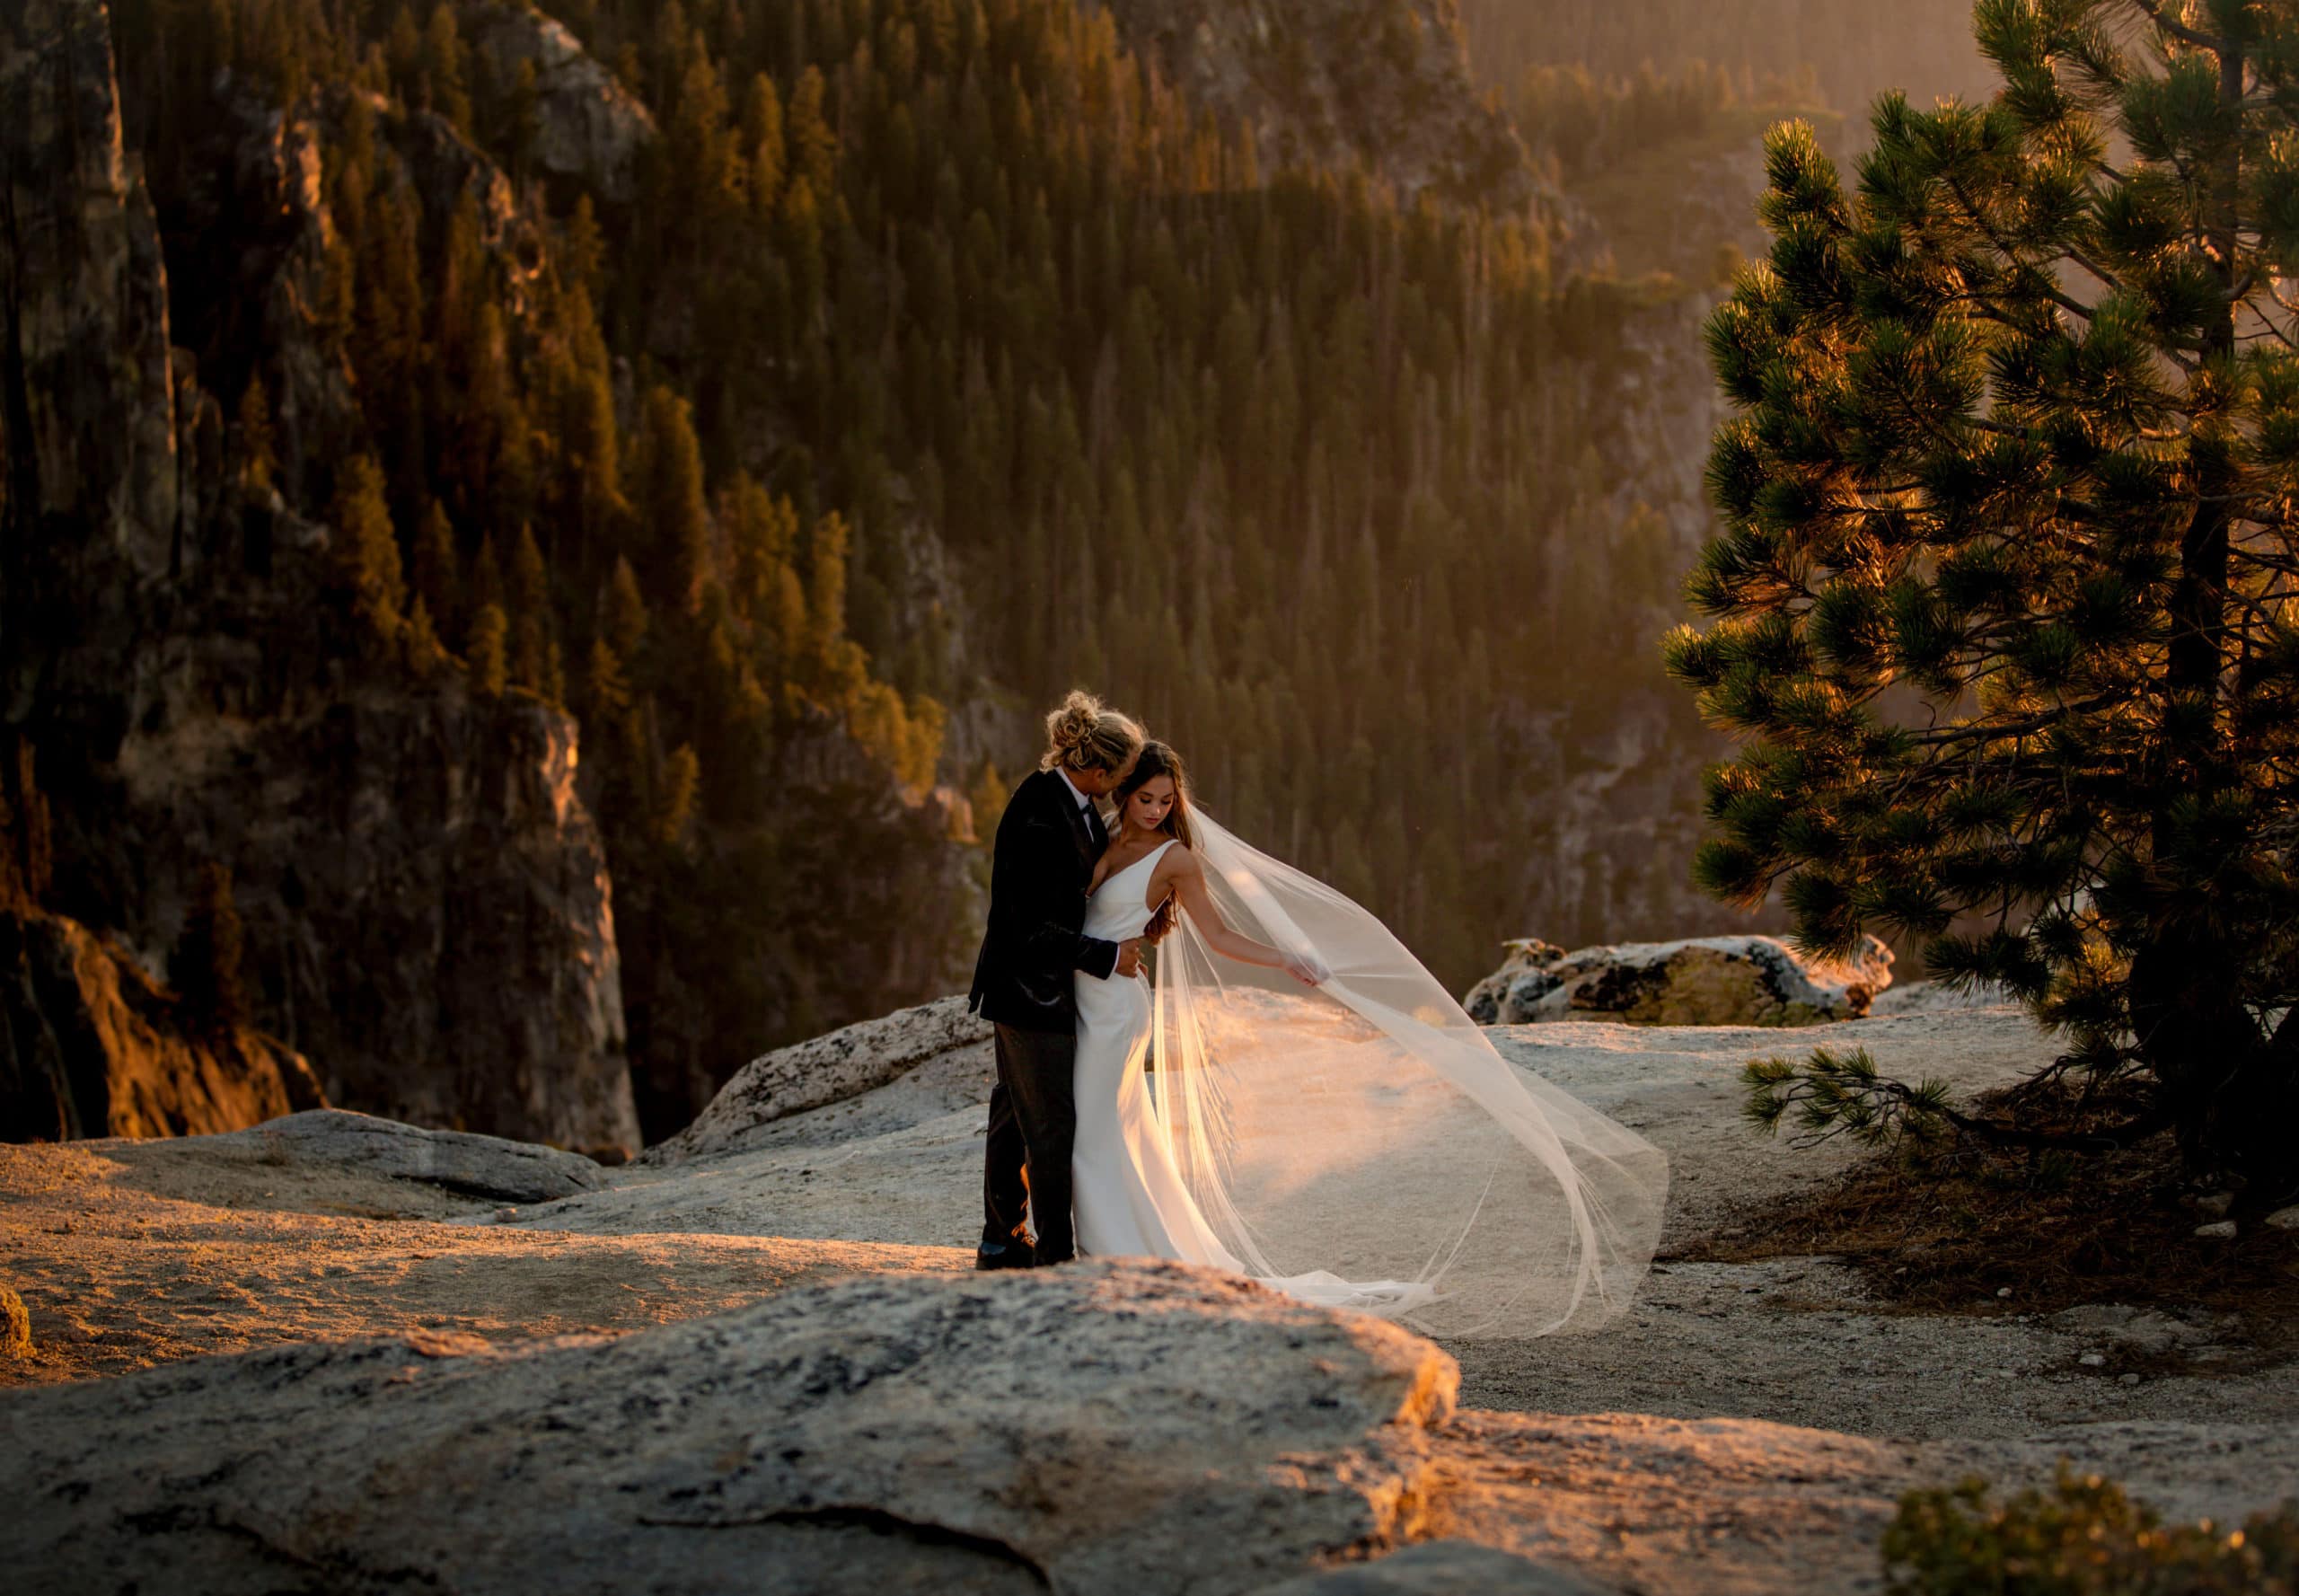 A picture of a couple in Yosemite national park taken by a California elopement photographer.